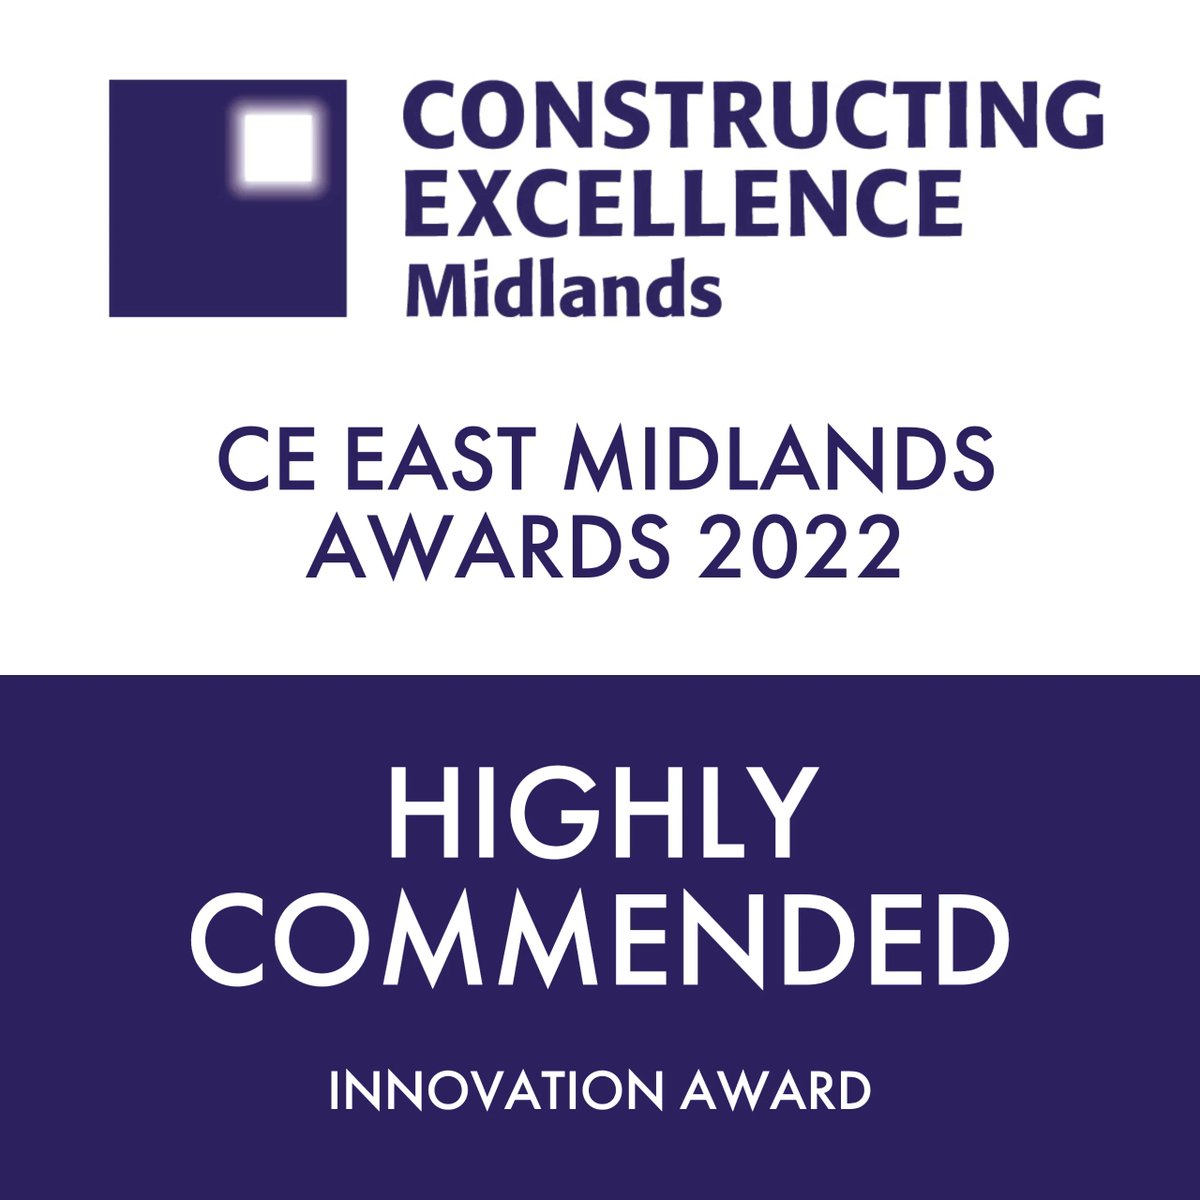 We are delighted to have been awarded Highly Commended for the Innovation category at this year's Constructing Excellence Awards 2022. #sustainability #solarpv #climatechange #sustainable #environment #ecofriendly #netzerocarbon #netzero2050 #netzero #solarenergy #solar #gogreen